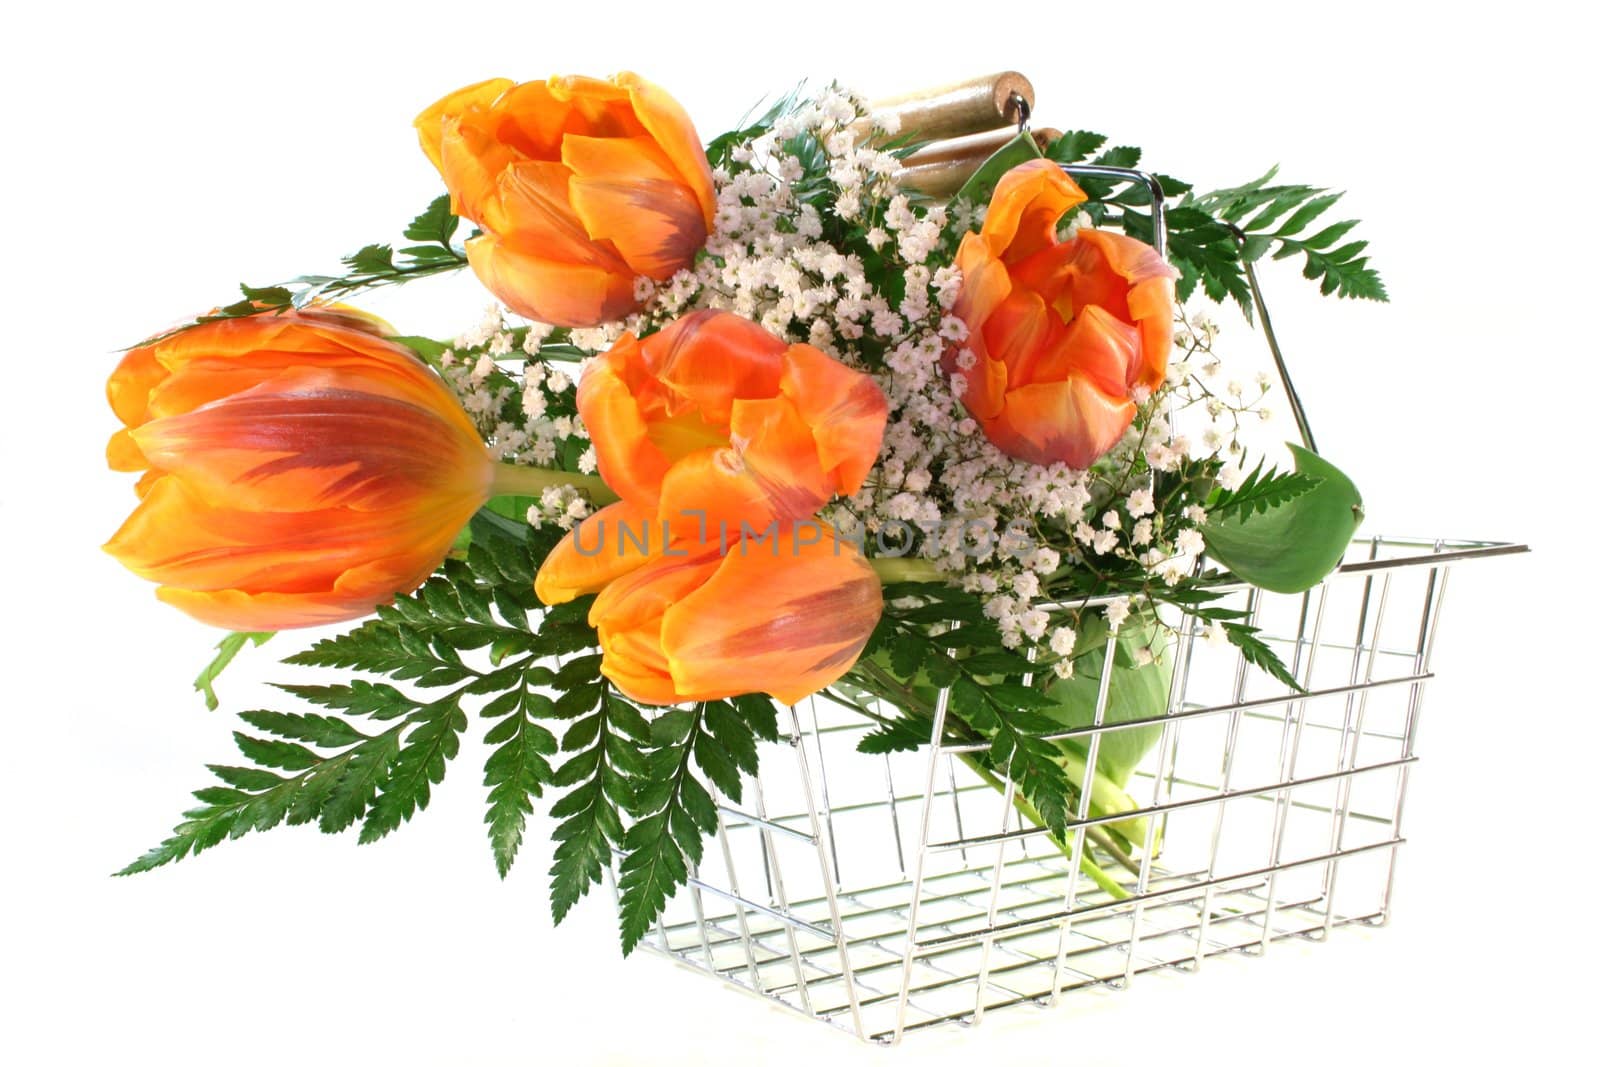 tulips in a basket by discovery